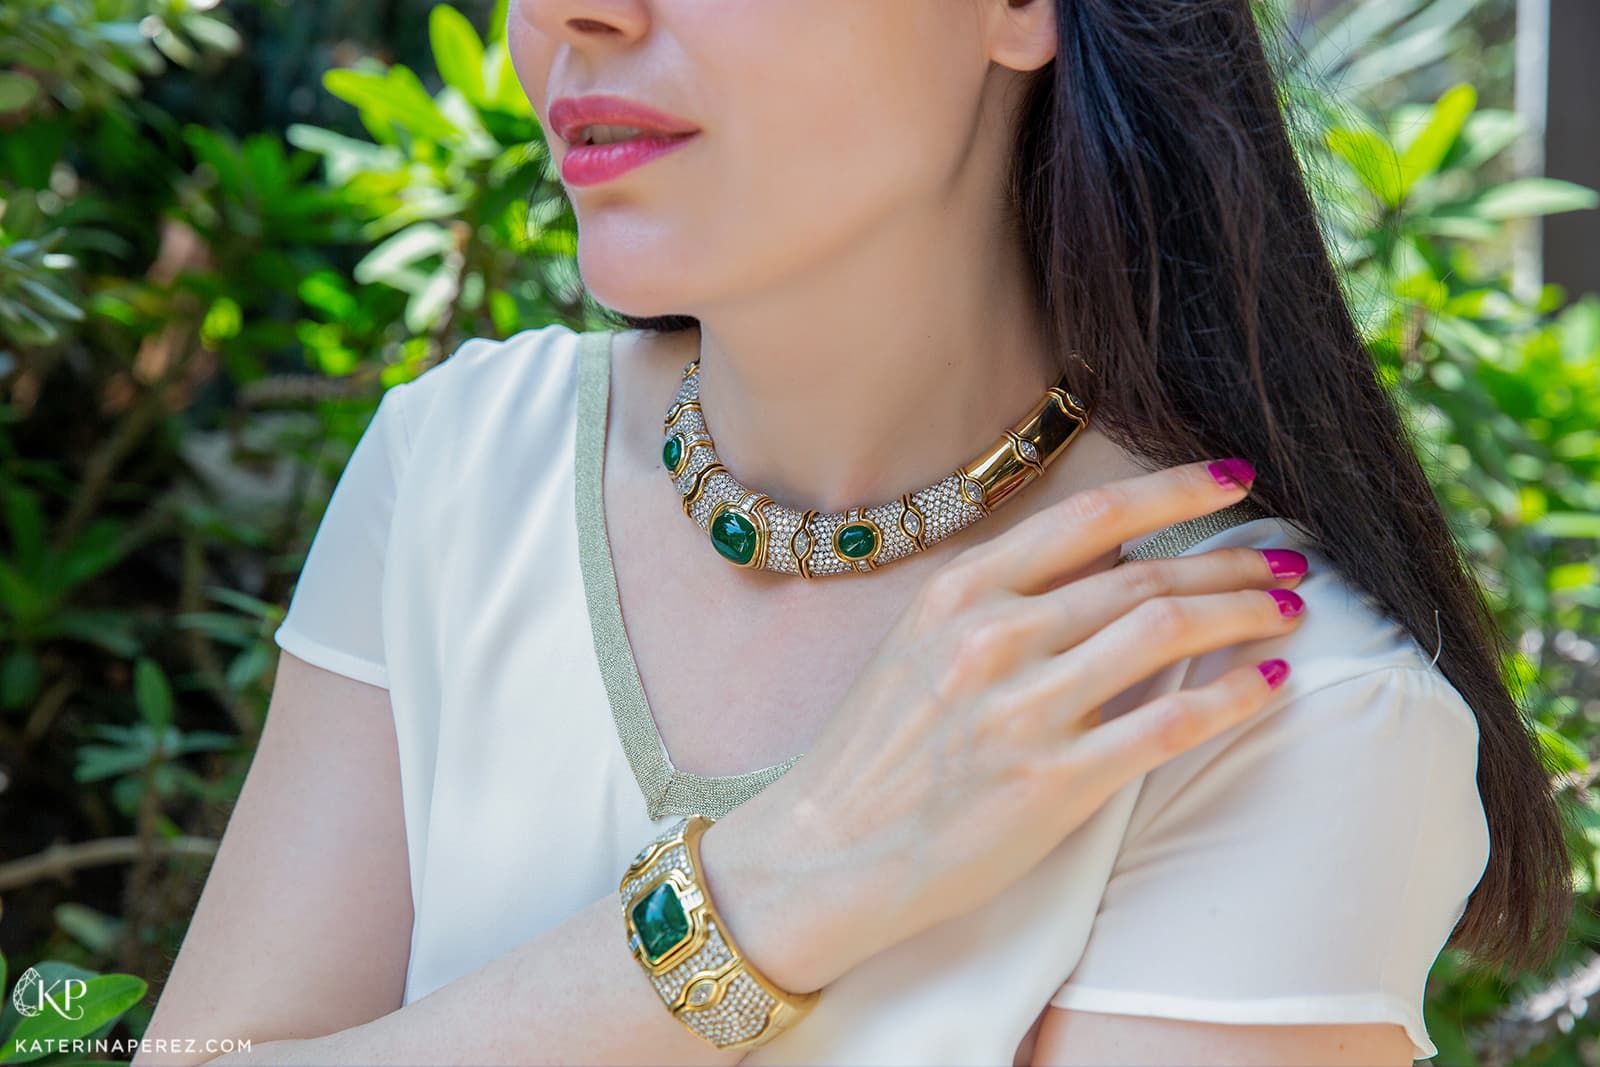 Vintage Bulgari bracelet and choker in yellow gold, set with cabochon cut emeralds and diamonds, circa 1970s-80s